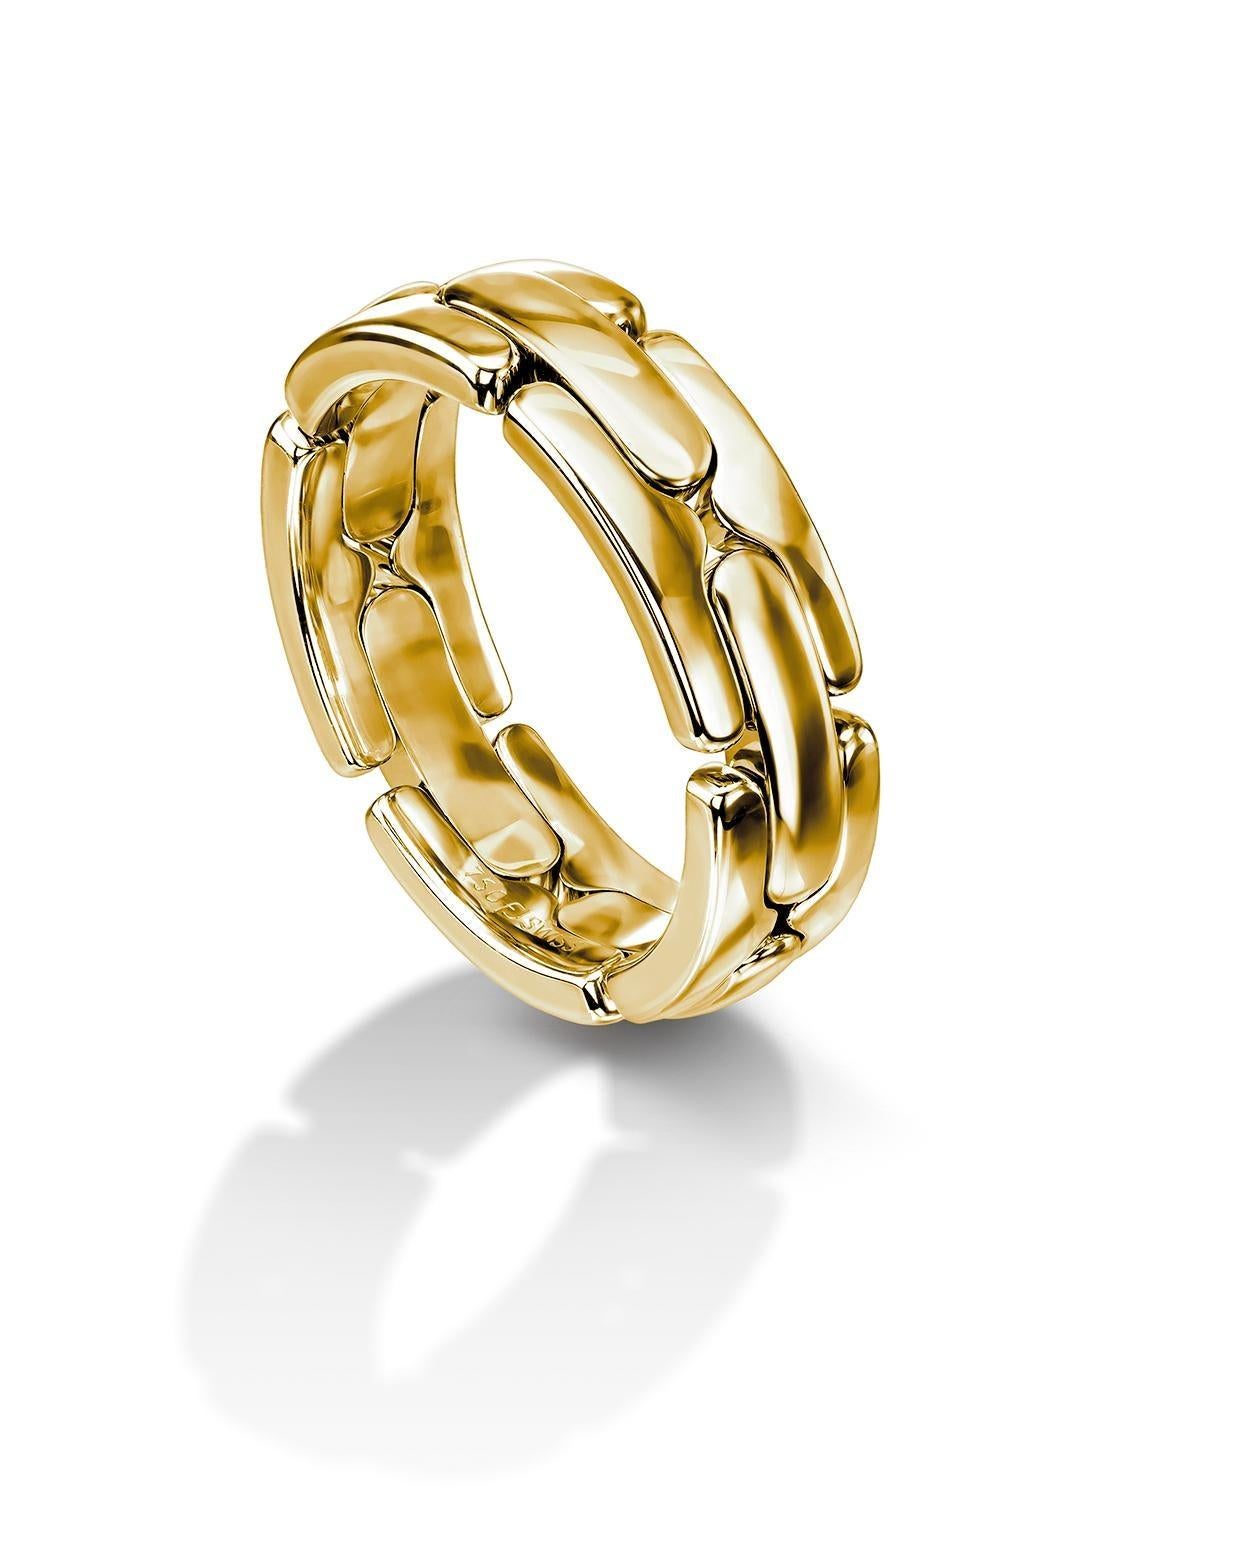 For Sale:  Furrer Jacot 18 Karat White and Yellow Gold Two-Tone Collapsible Link Ring 4